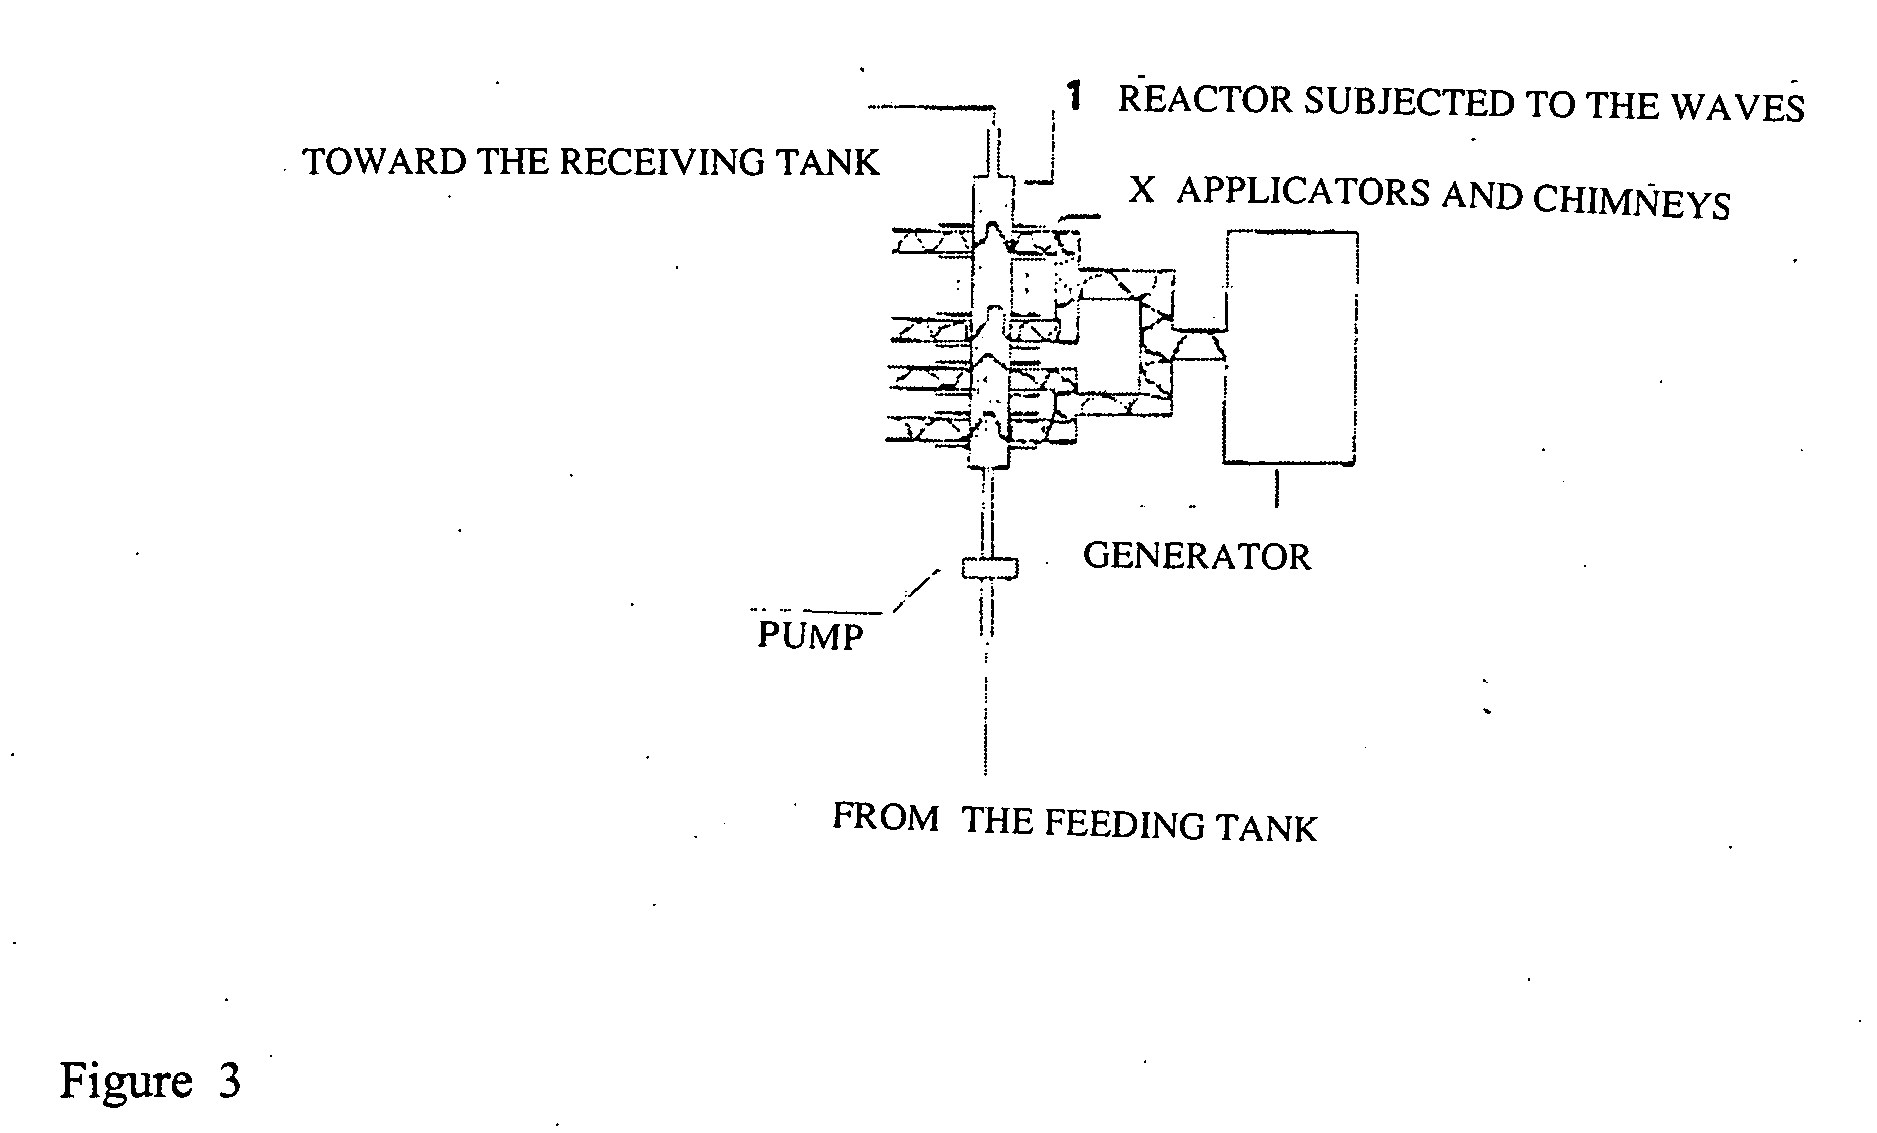 Chemical synthesis comprising heat treatment by intrmittent dielectric heating combined with a recycling system